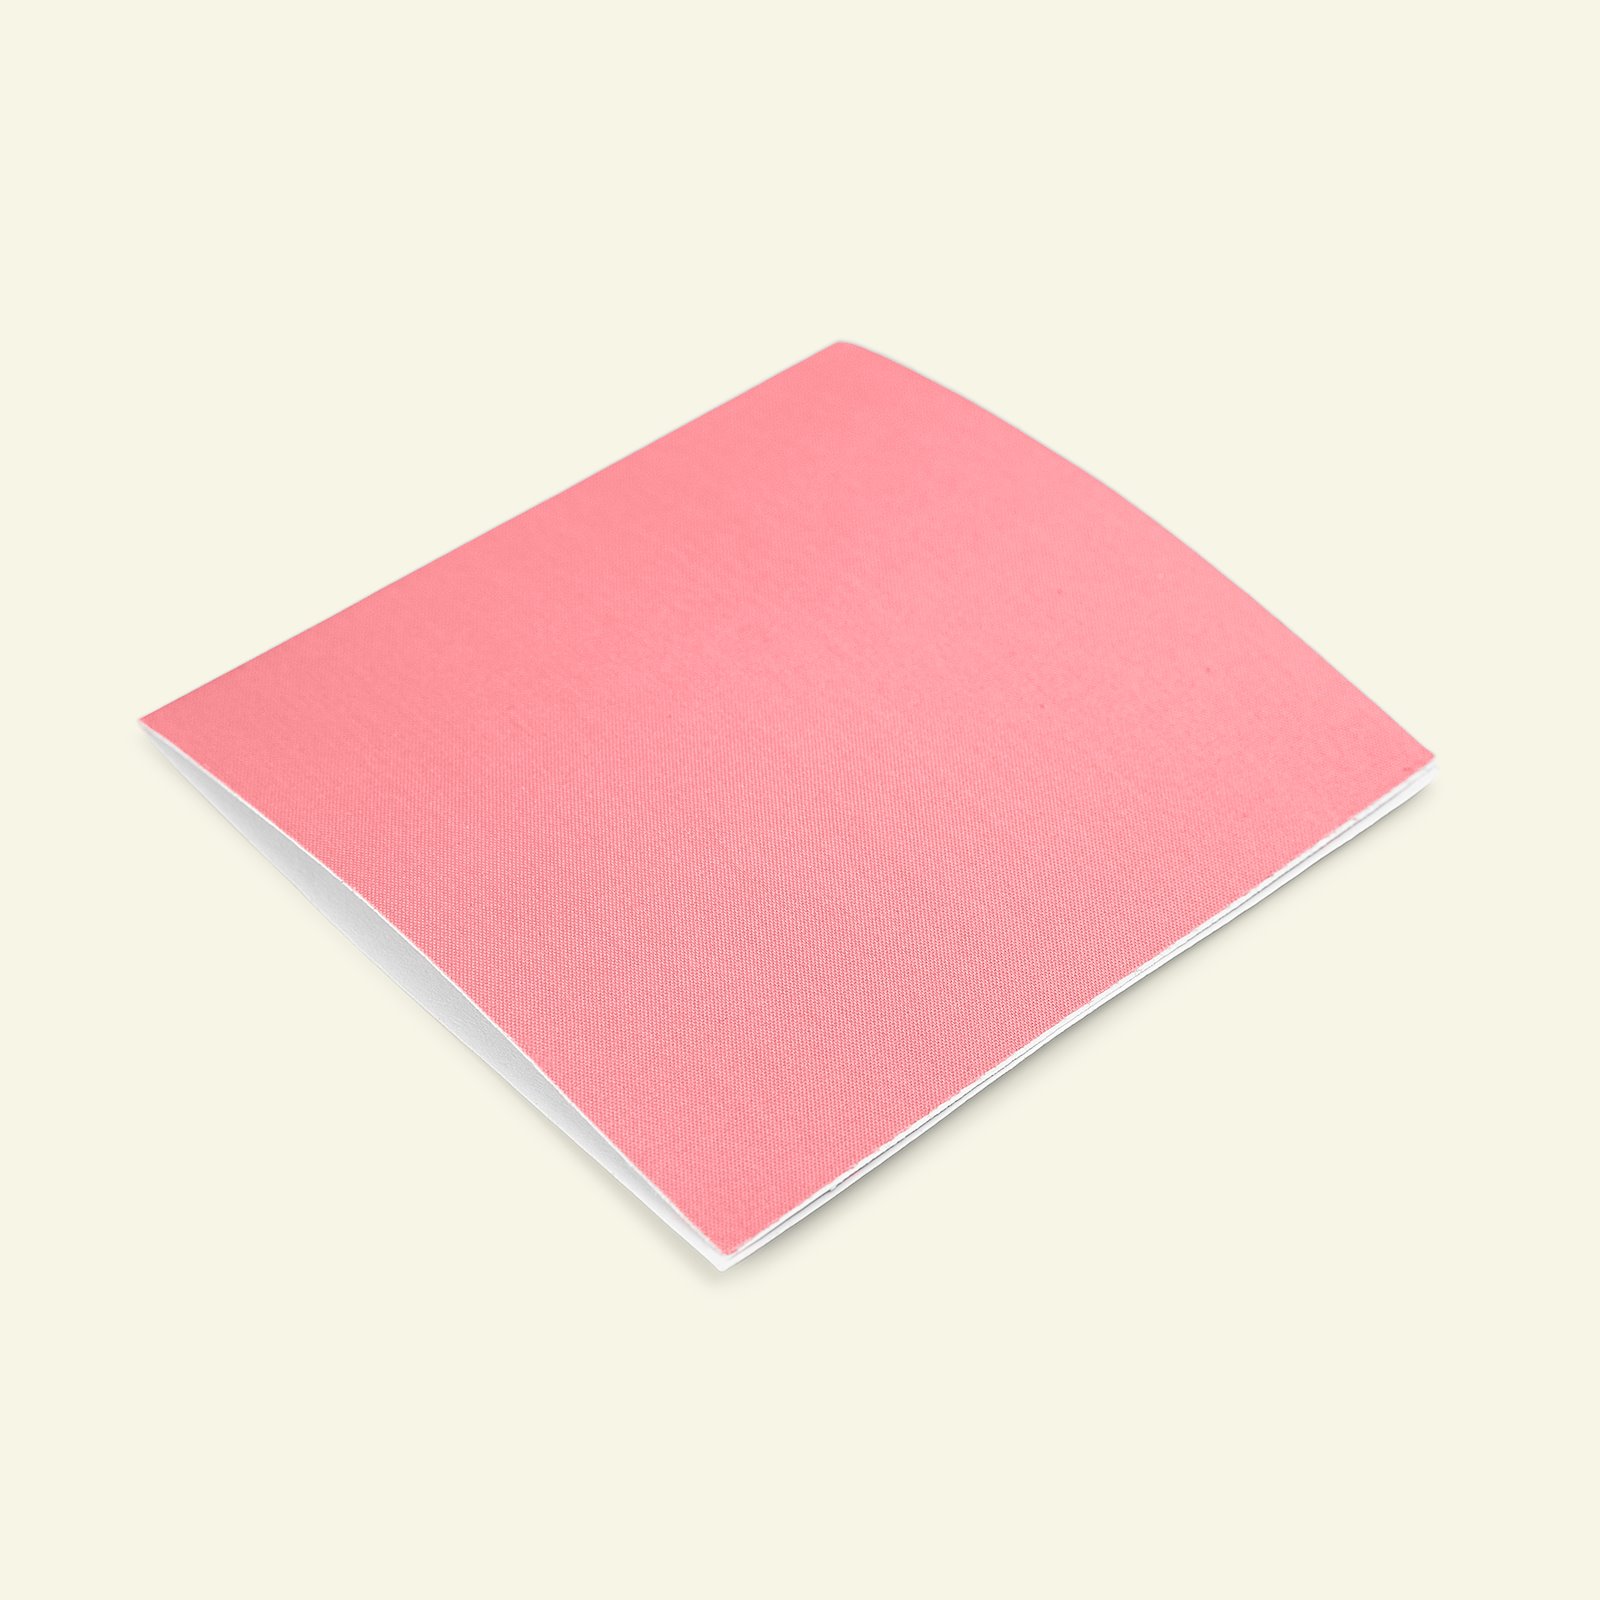 Patch for repair nylon 10x20cm pink 94073_pack_b